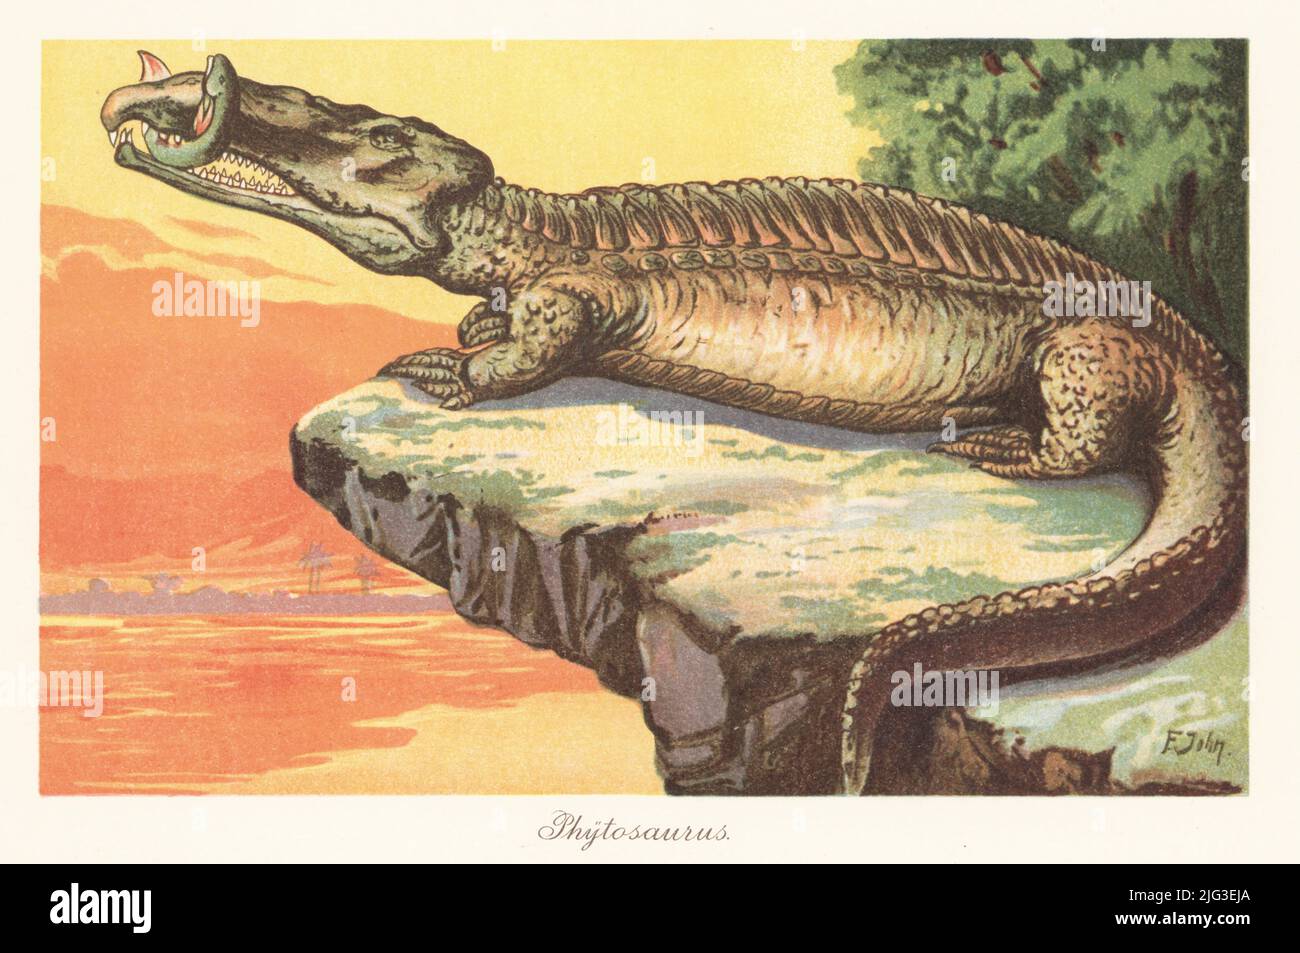 Reconstruction of a phytosaur, Nicrosaurus kapffi, of the Late Triassic. Krokodil, Belodon kapffii. It holds a a Ceratodus lungfish in its jaws. Phytosaurus. Colour printed illustration by F. John from Wilhelm Bolsche’s Tiere der Urwelt (Animals of the Prehistoric World), Reichardt Cocoa company, Hamburg, 1908. Stock Photo